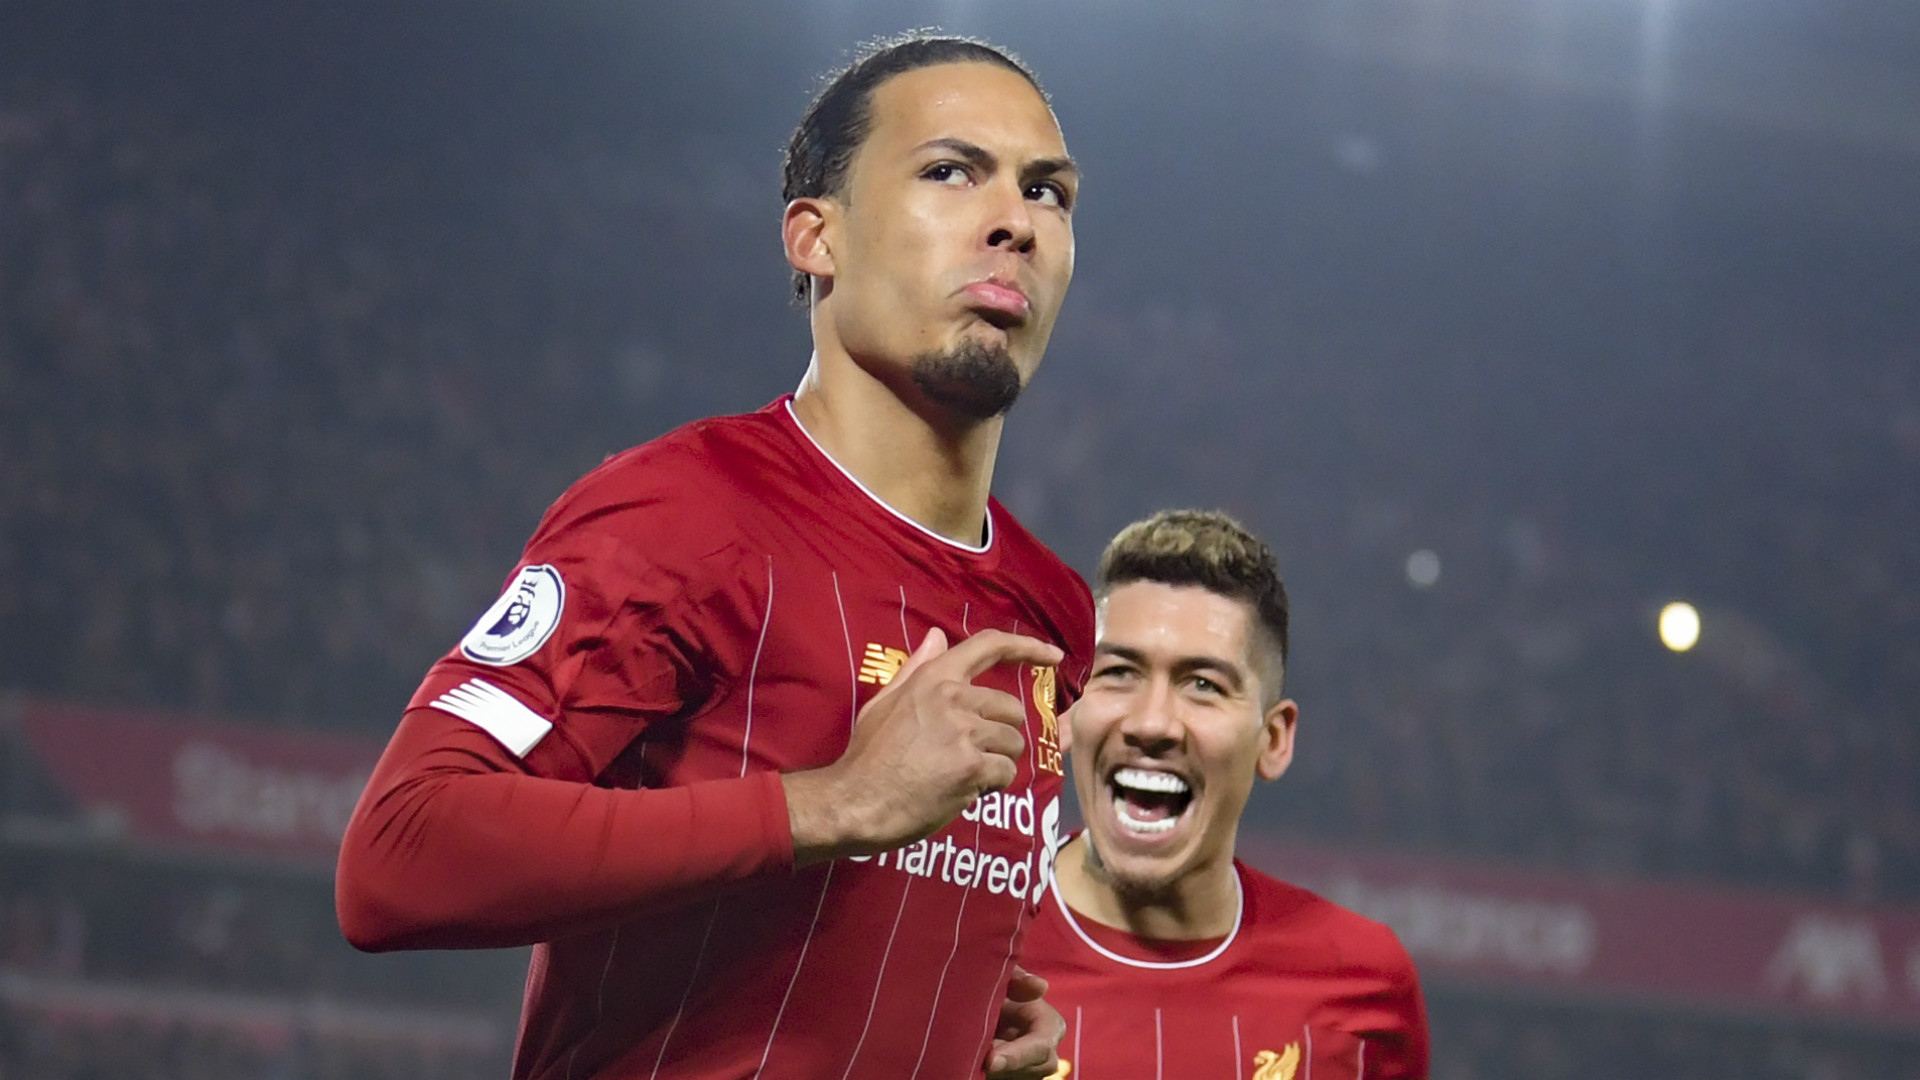 'Van Dijk was Ferdinand in the making' - Liverpool star compared to ex-Man Utd defender by former manager Lennon